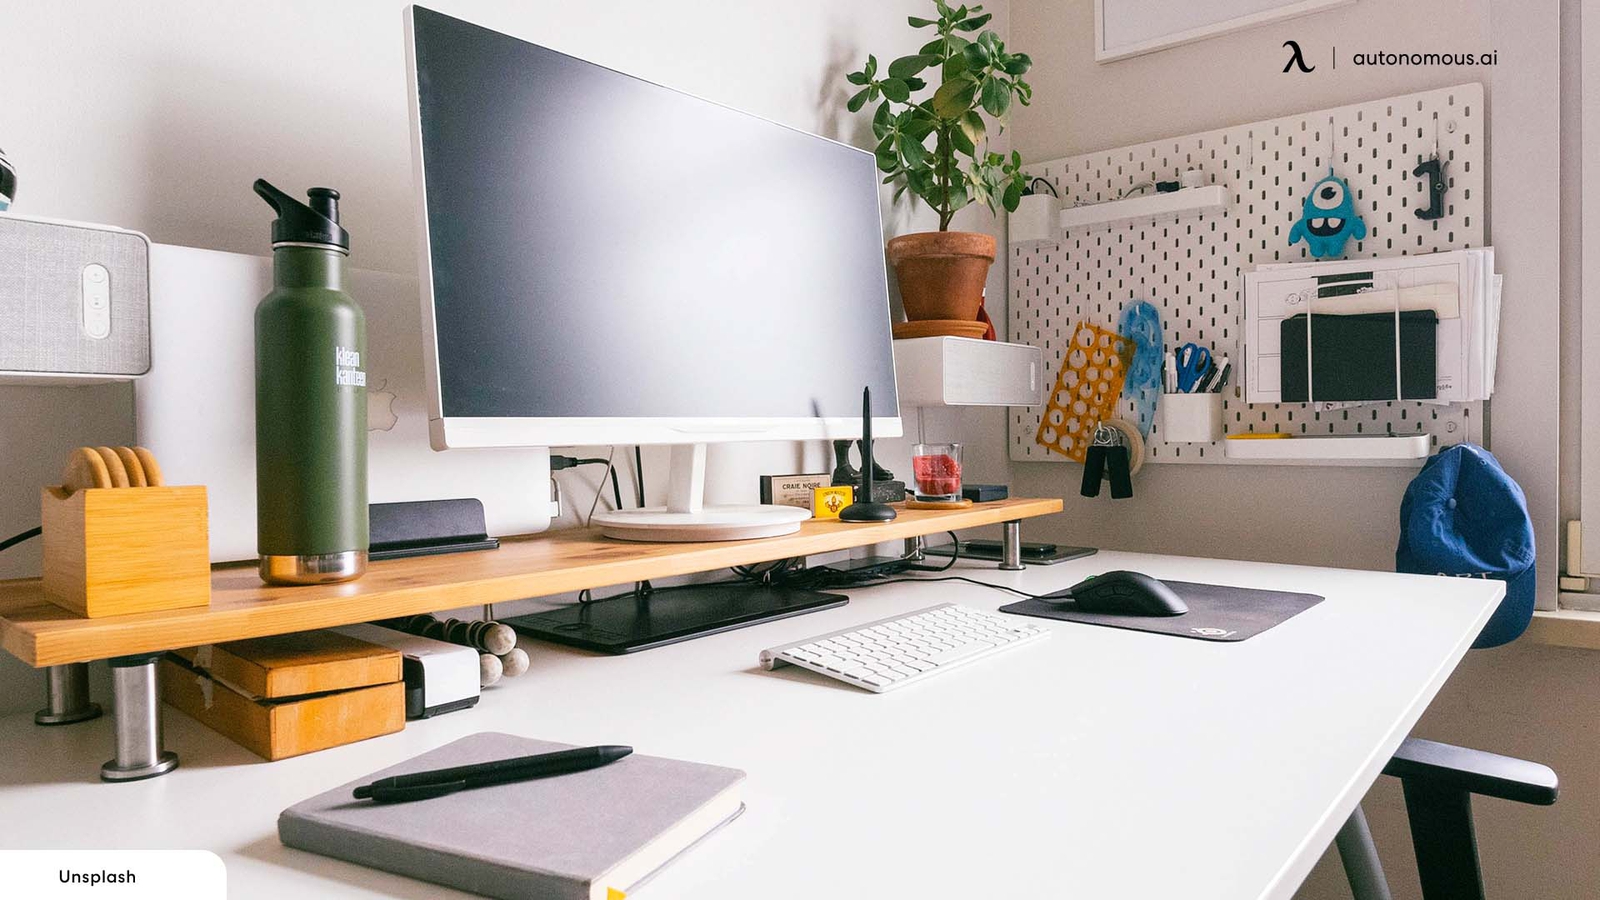 How to Keep Your Workspace Clean and Organized?